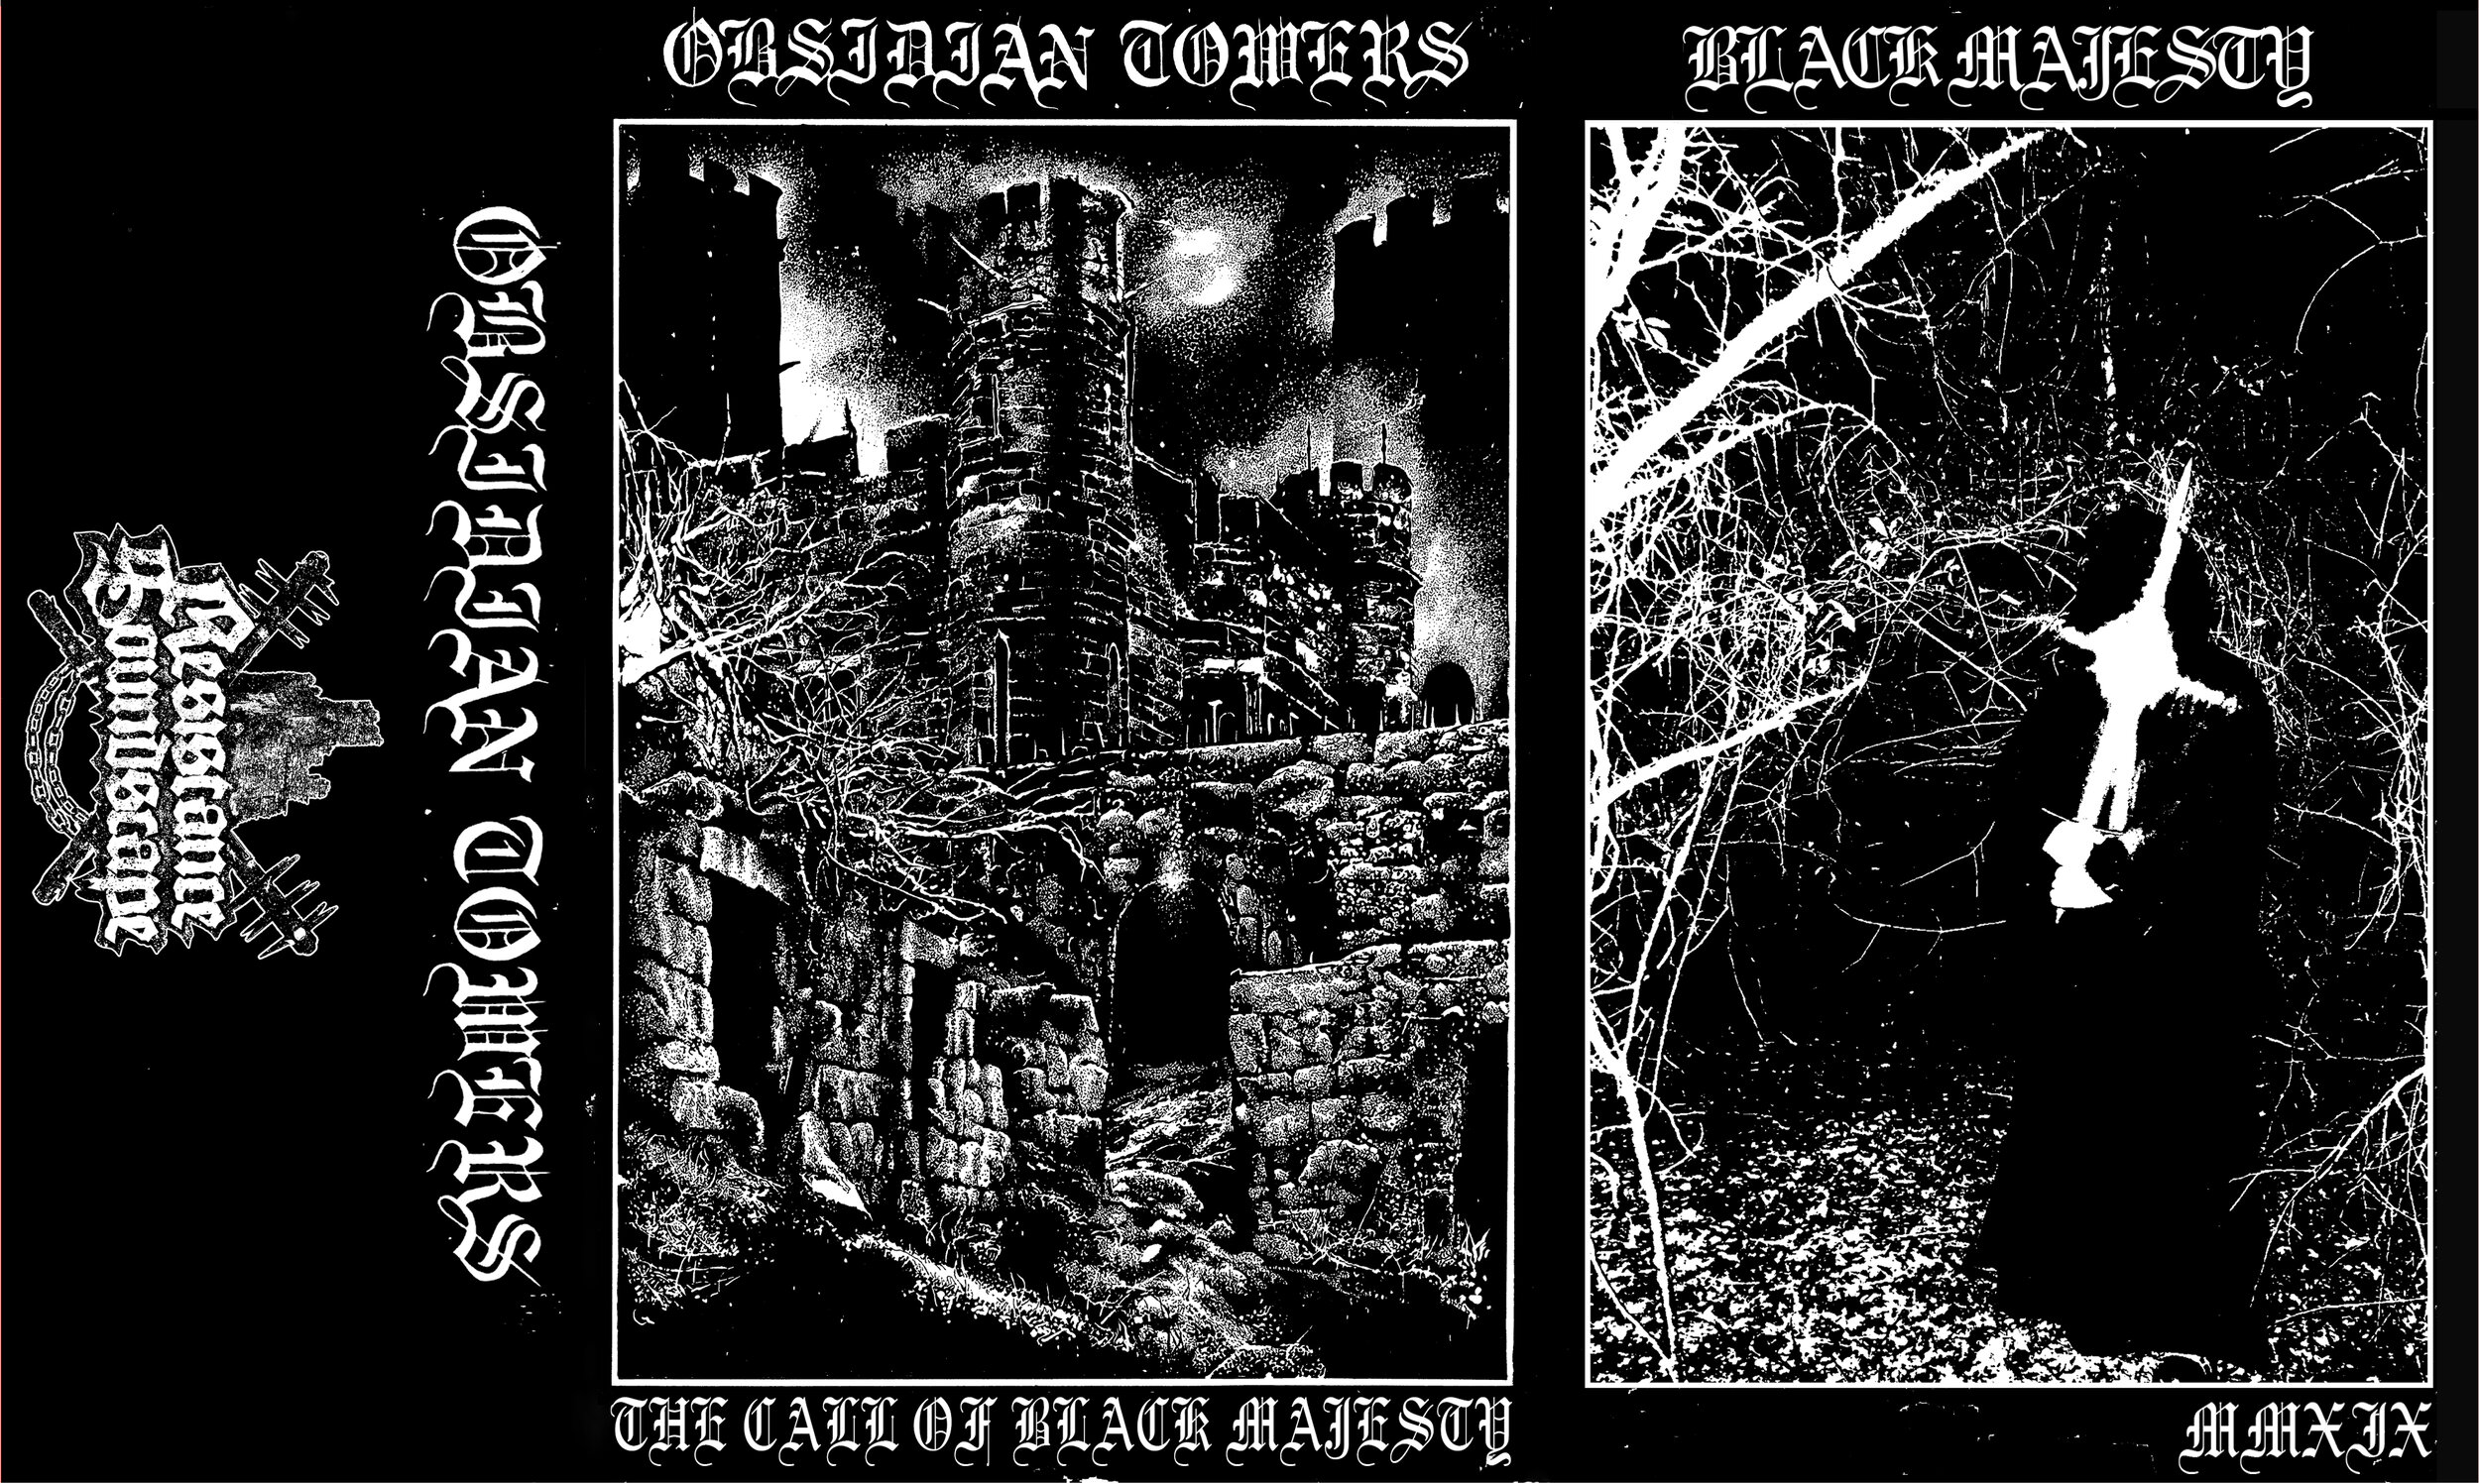 OBSIDIAN TOWERS 'Call of Black Majesty' cassette J-card cover (European version)